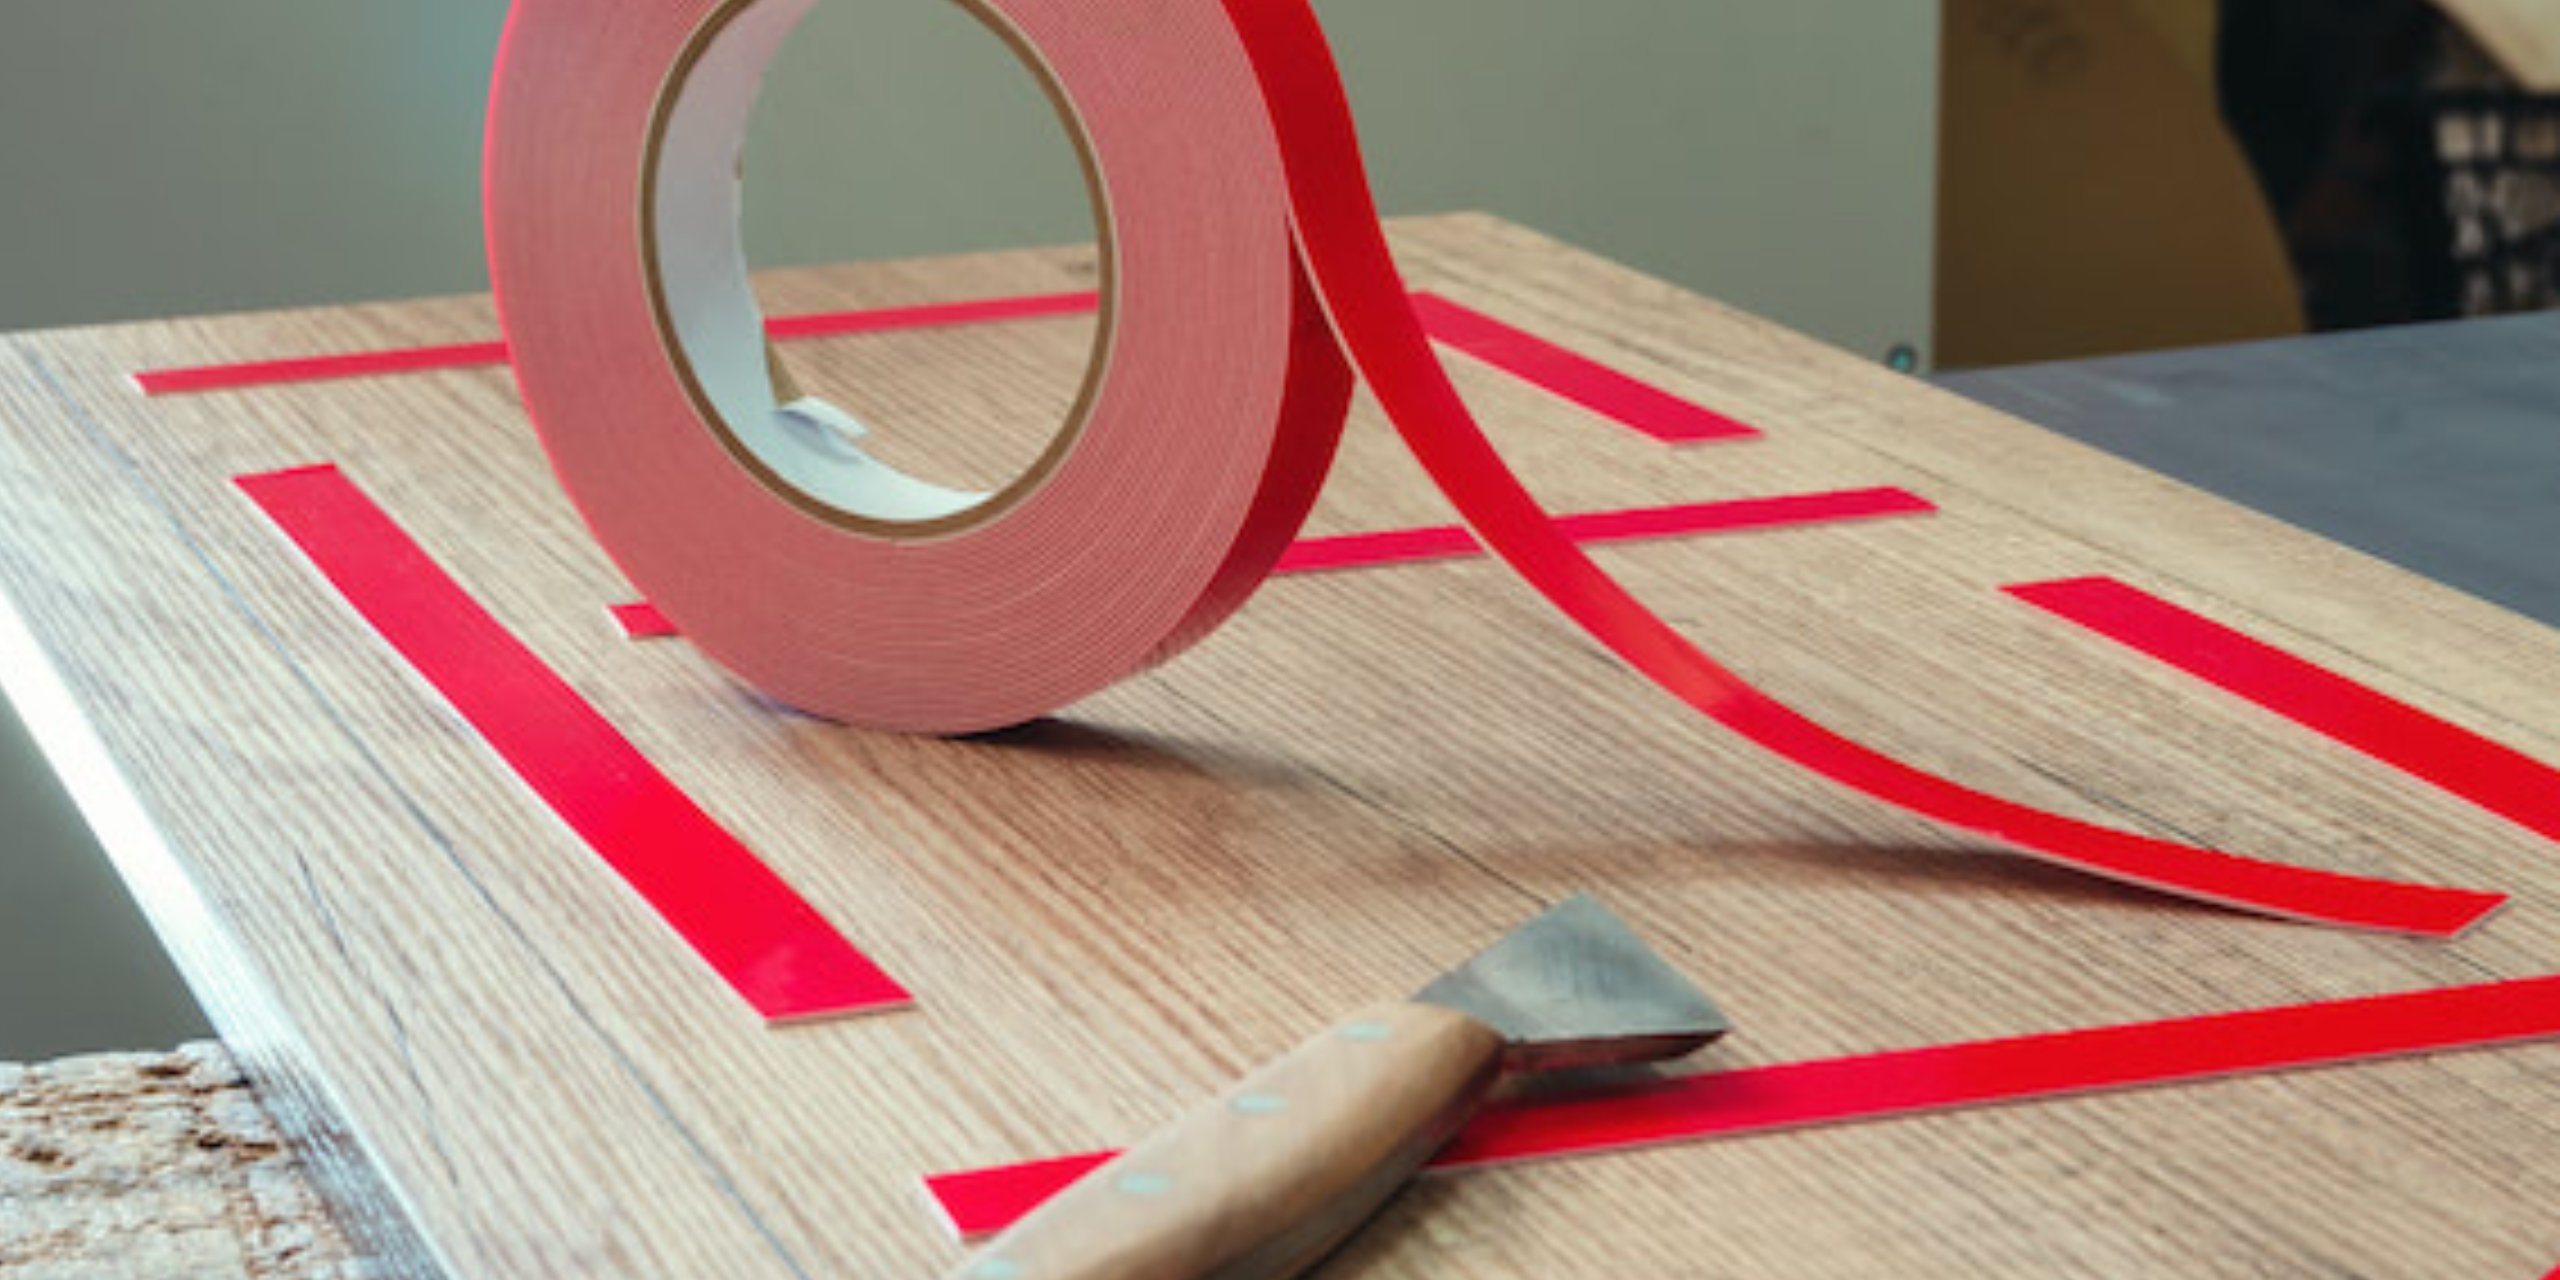 Heavy-Duty Double Sided Tape: Considerations and Best Uses